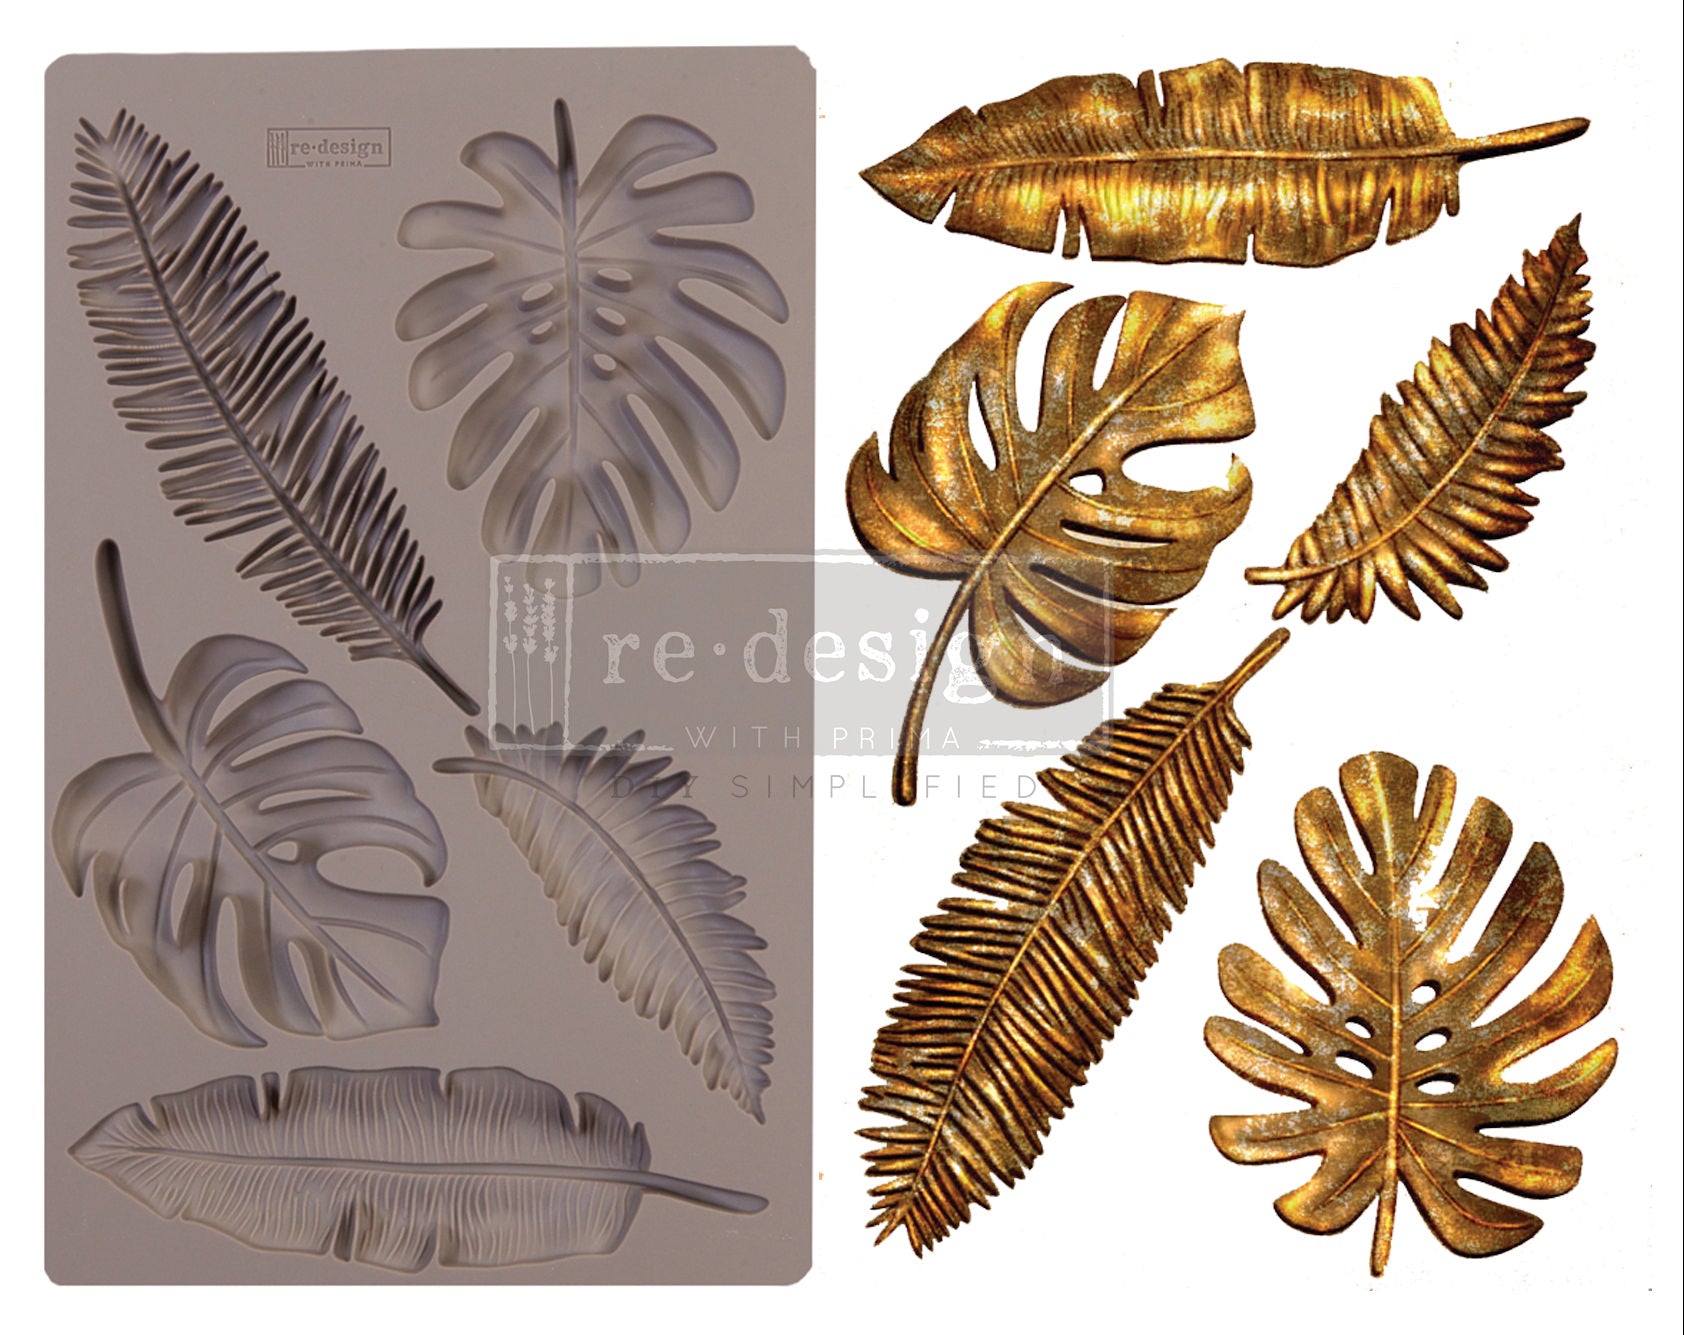 *New* Redesign with Prima Mould Monstera